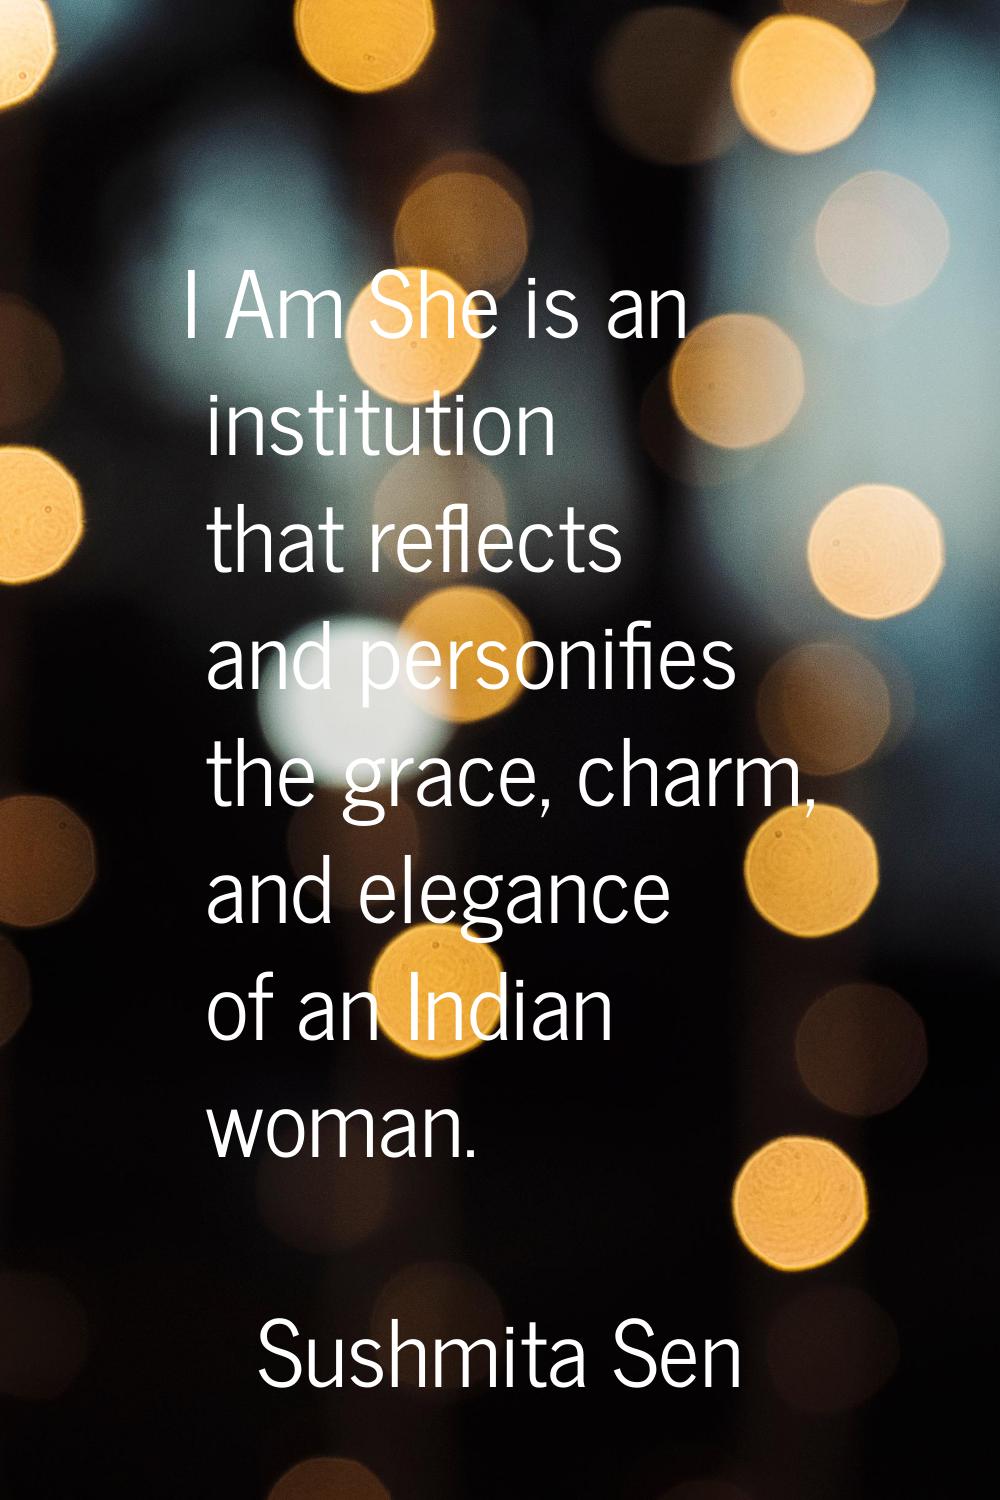 I Am She is an institution that reflects and personifies the grace, charm, and elegance of an India